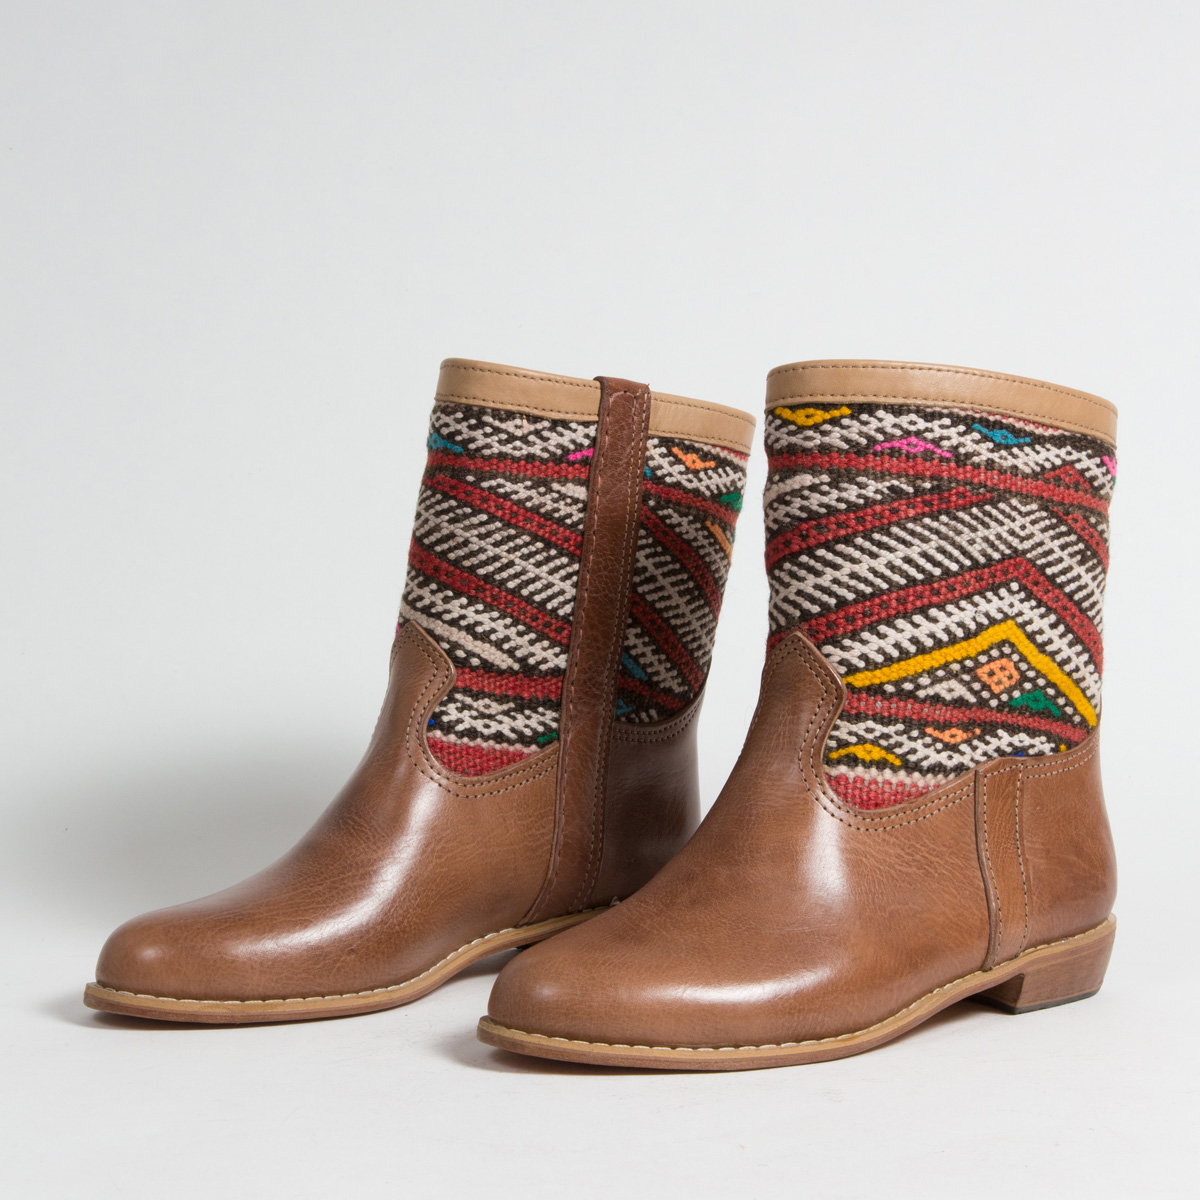 Bottines Kilim cuir mababouche artisanales (Réf. MCH6-42)